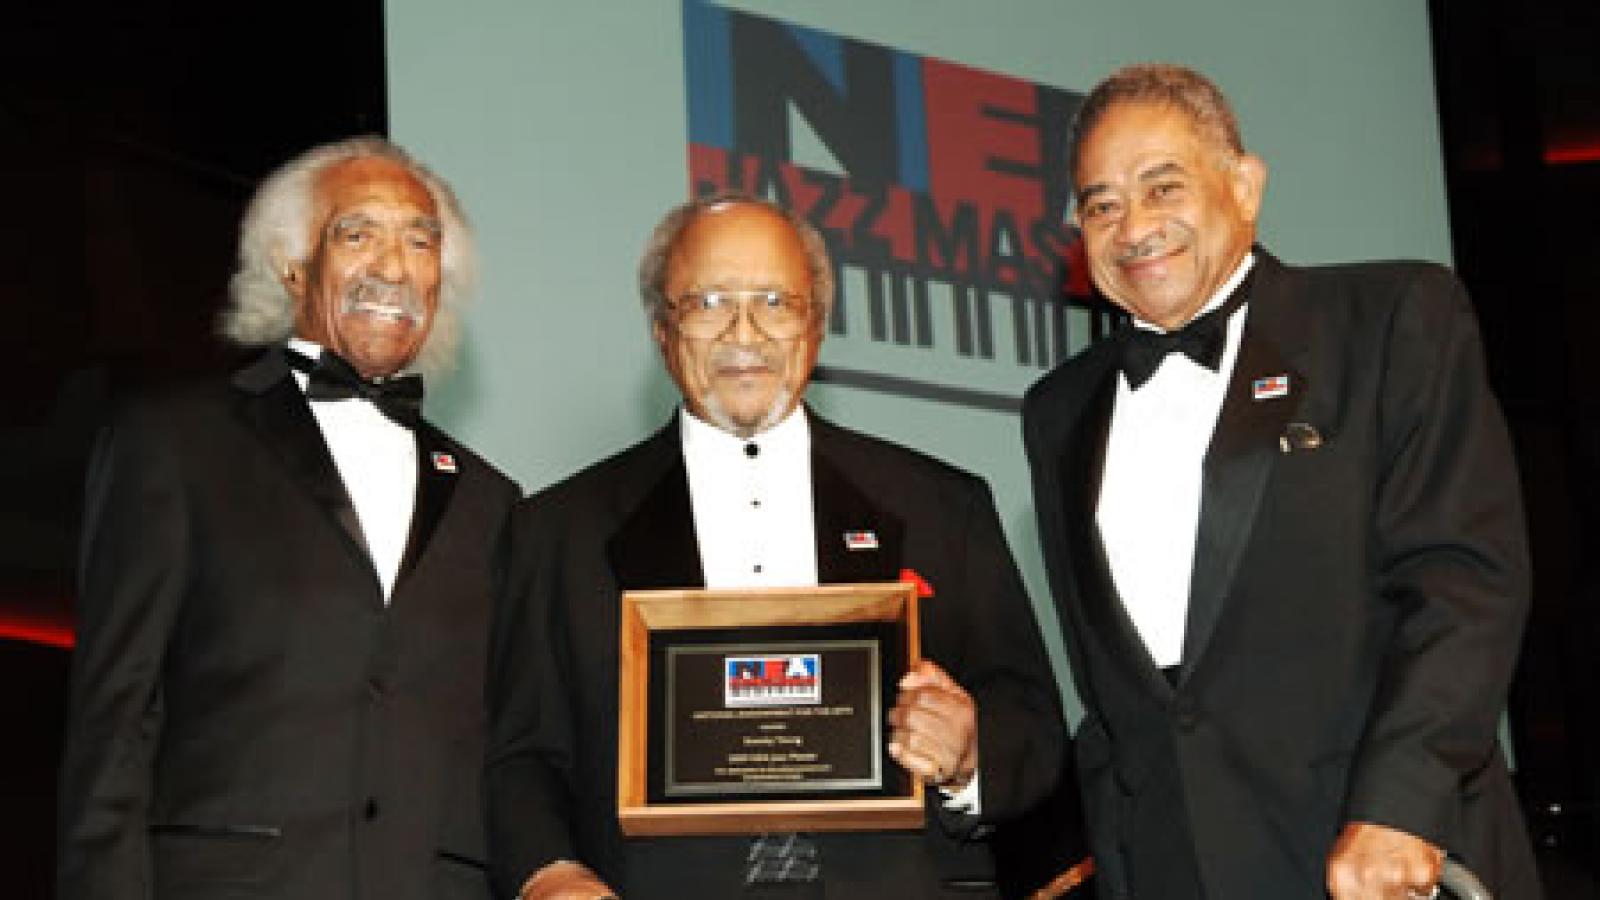 2009 NEA Jazz Master Eugene Edward “Snooky” Young is presented with his award by friends and fellow NEA Jazz Masters Gerald Wilson and Frank Wess. Photo by Tom Pich